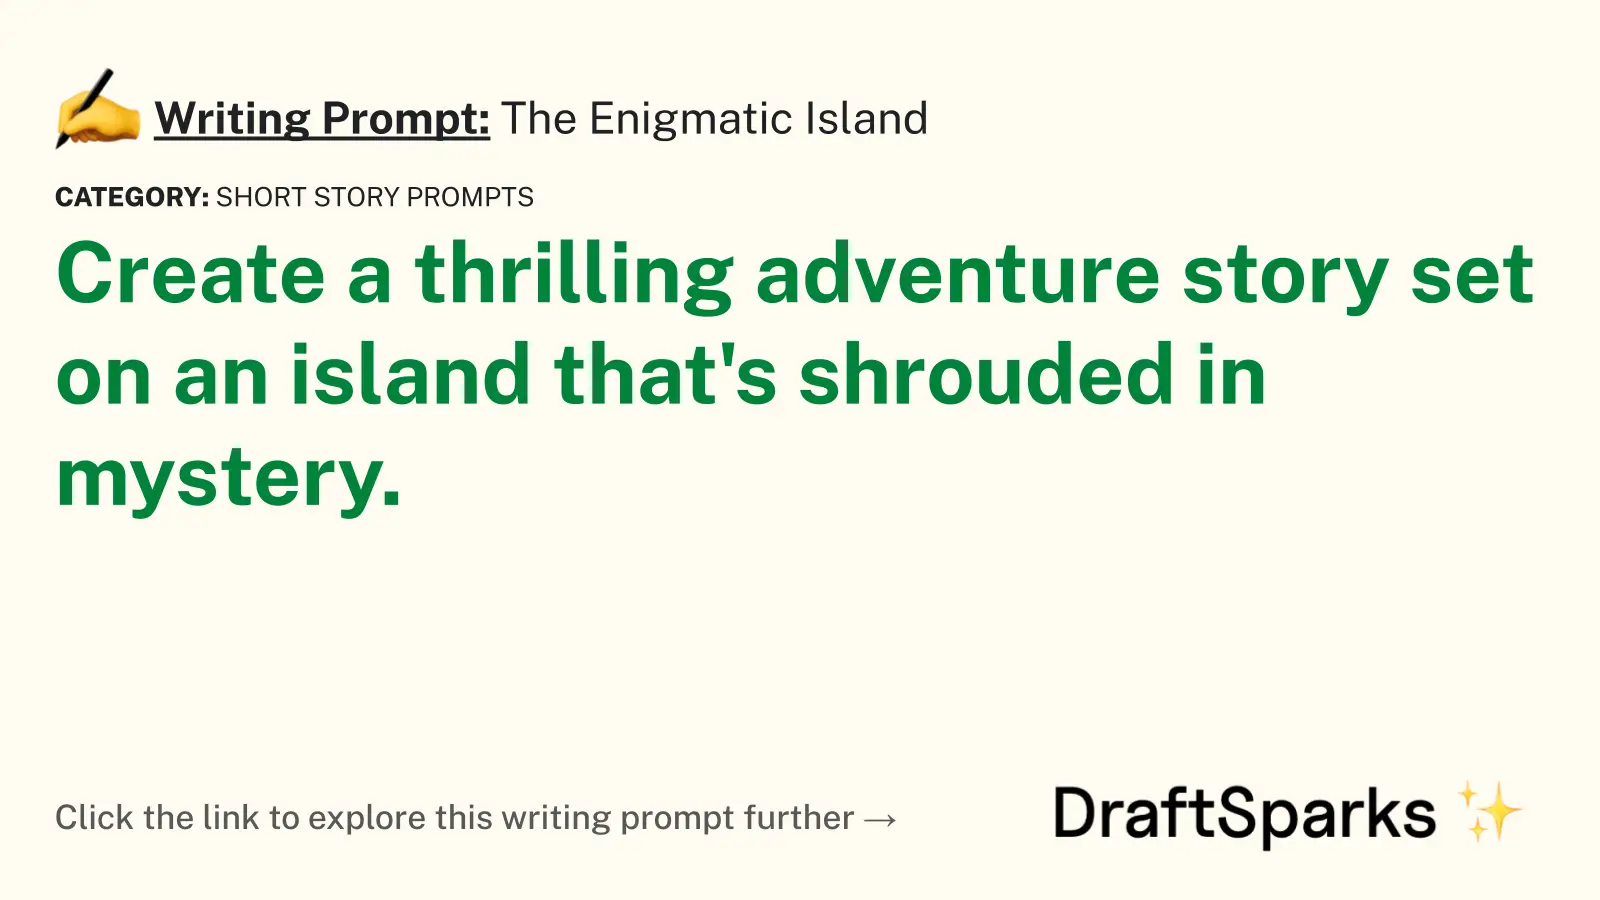 The Enigmatic Island